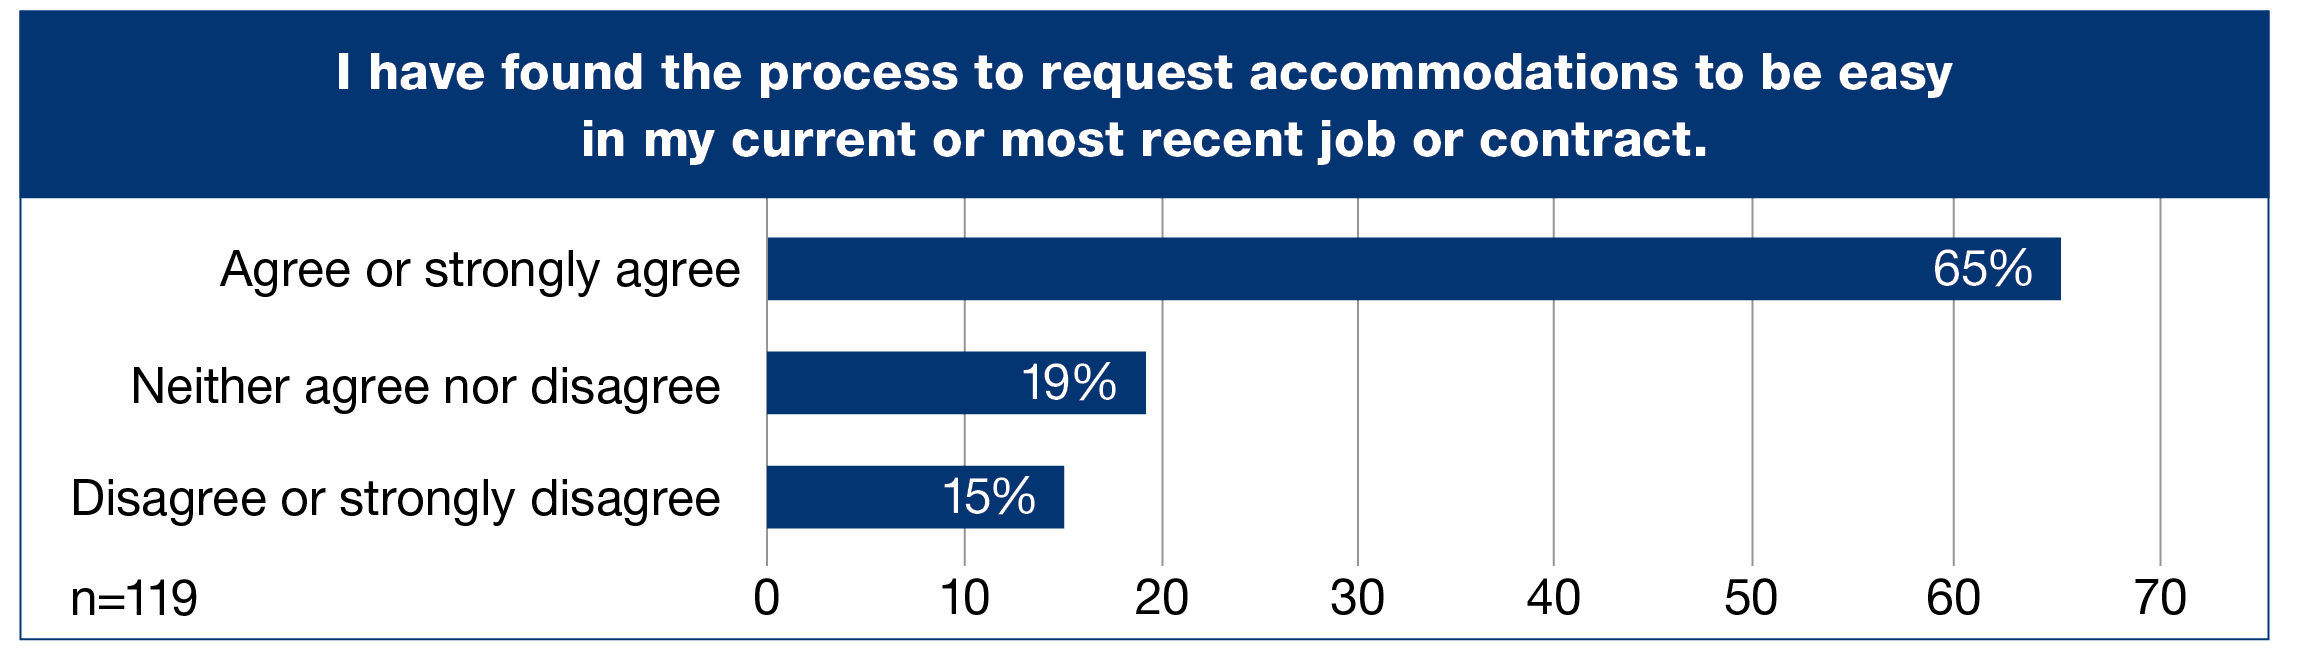 I have found the process to request accommodations to be easy in my current or most recent job or contract, (Percent of n=119), horizontal bar graph with three bars, Agree or strongly agree, 65%; Neither agree nor disagree, 19%; Disagree or strongly disagree, 15%.